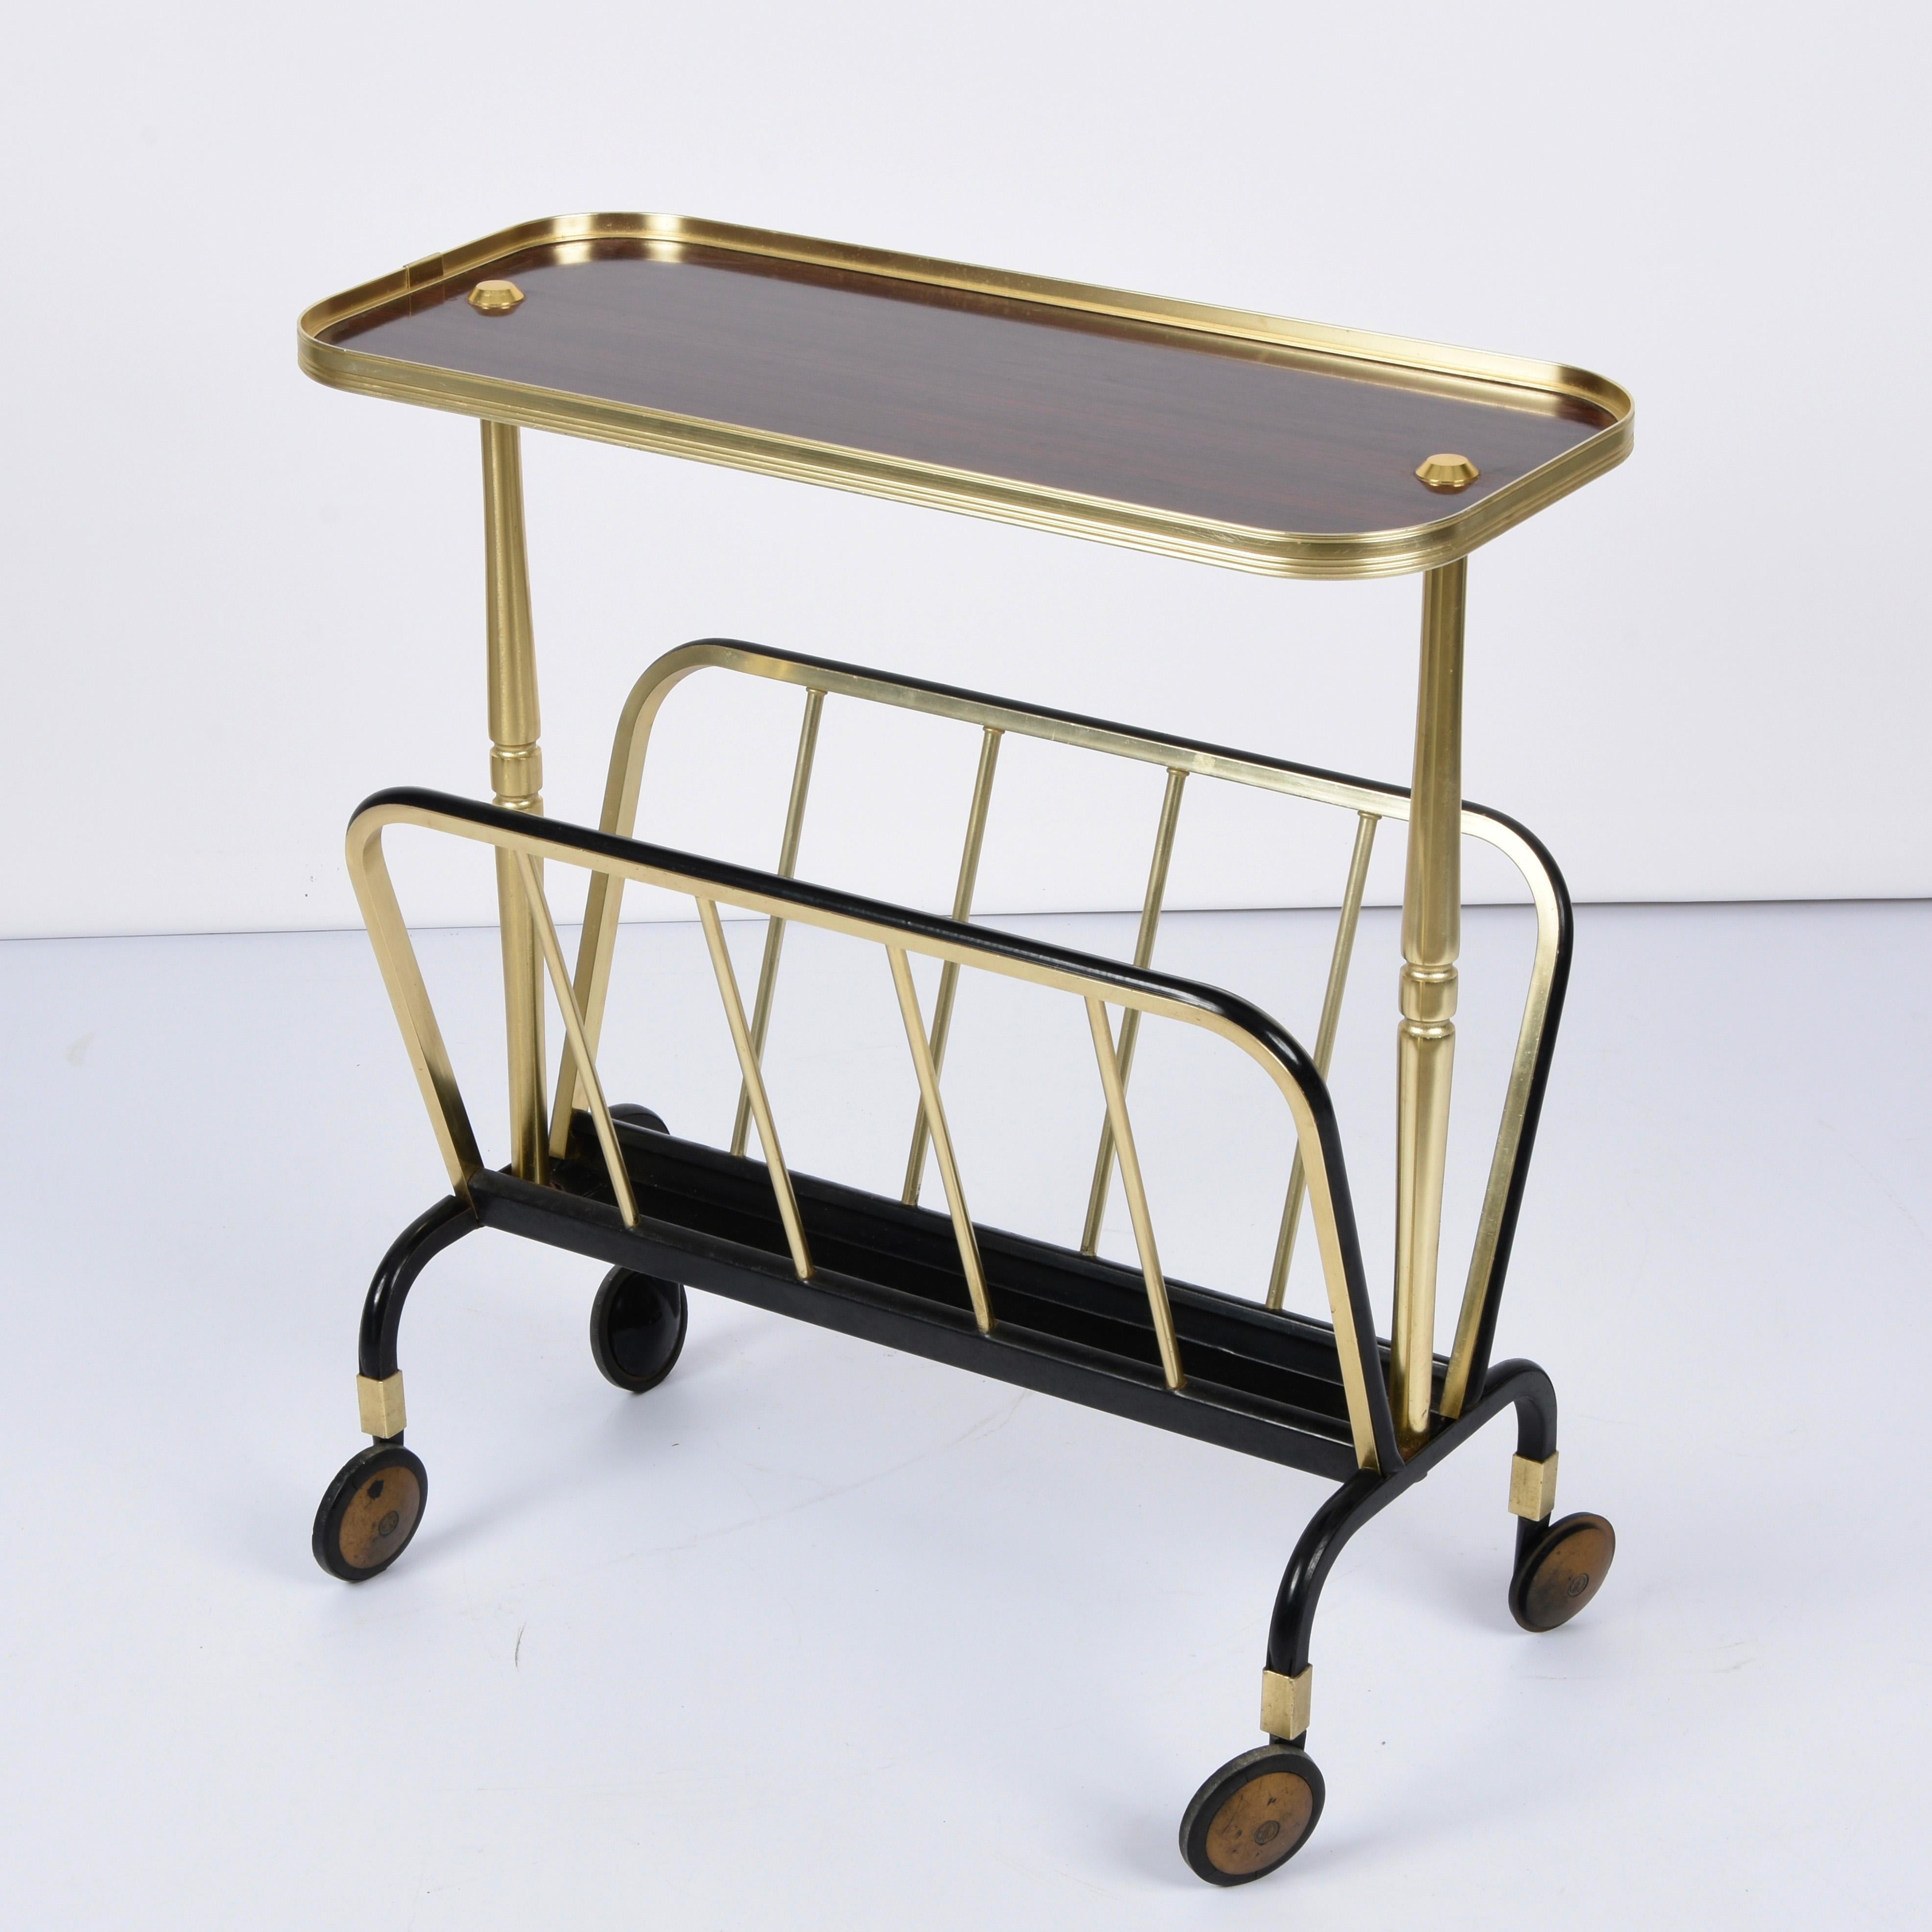 Ico Parisi Midcentury Aluminum and Formica Trolley Magazine Rack for MB, 1960s For Sale 6